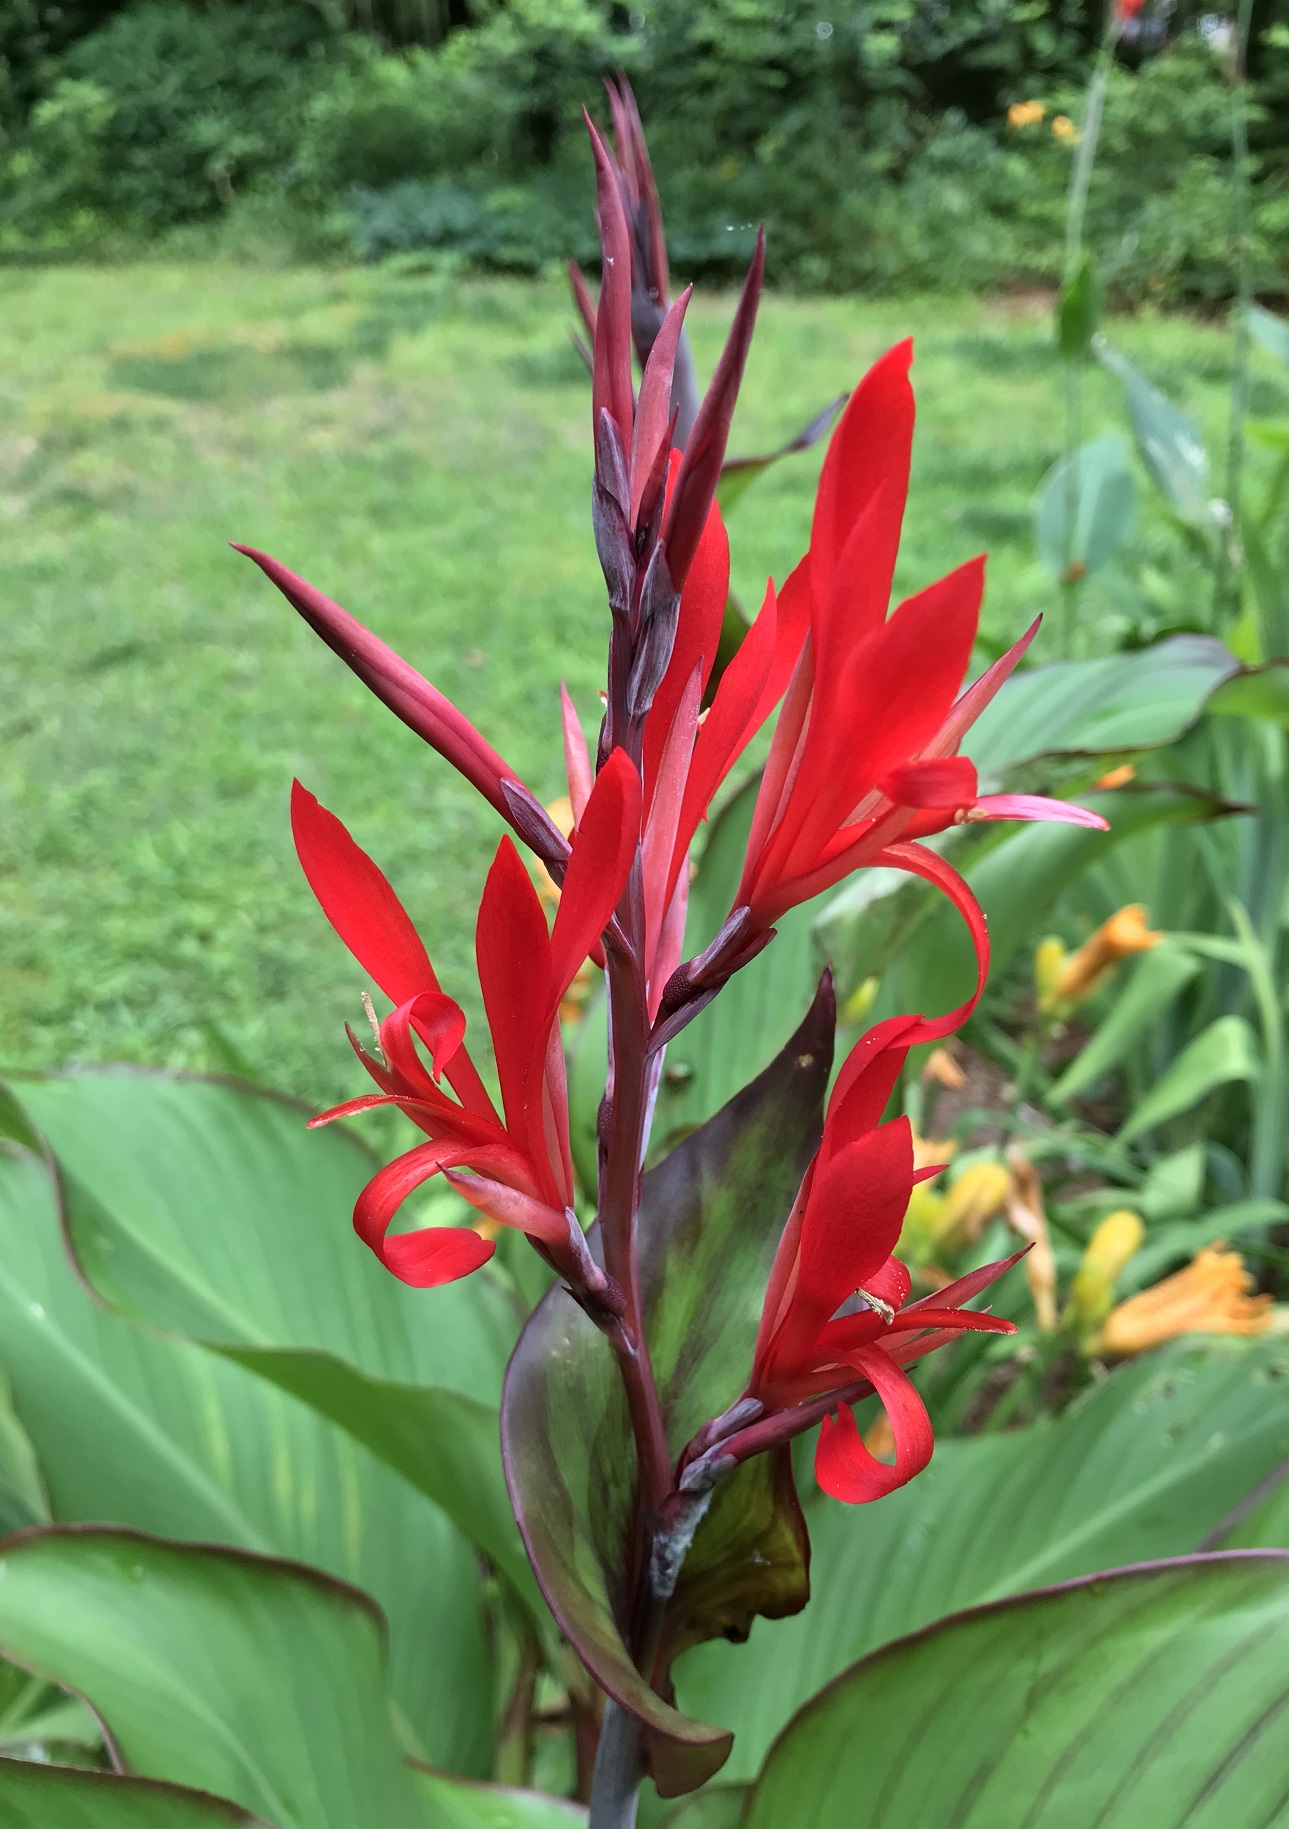 Flowers of Canna indica "Musifolia"